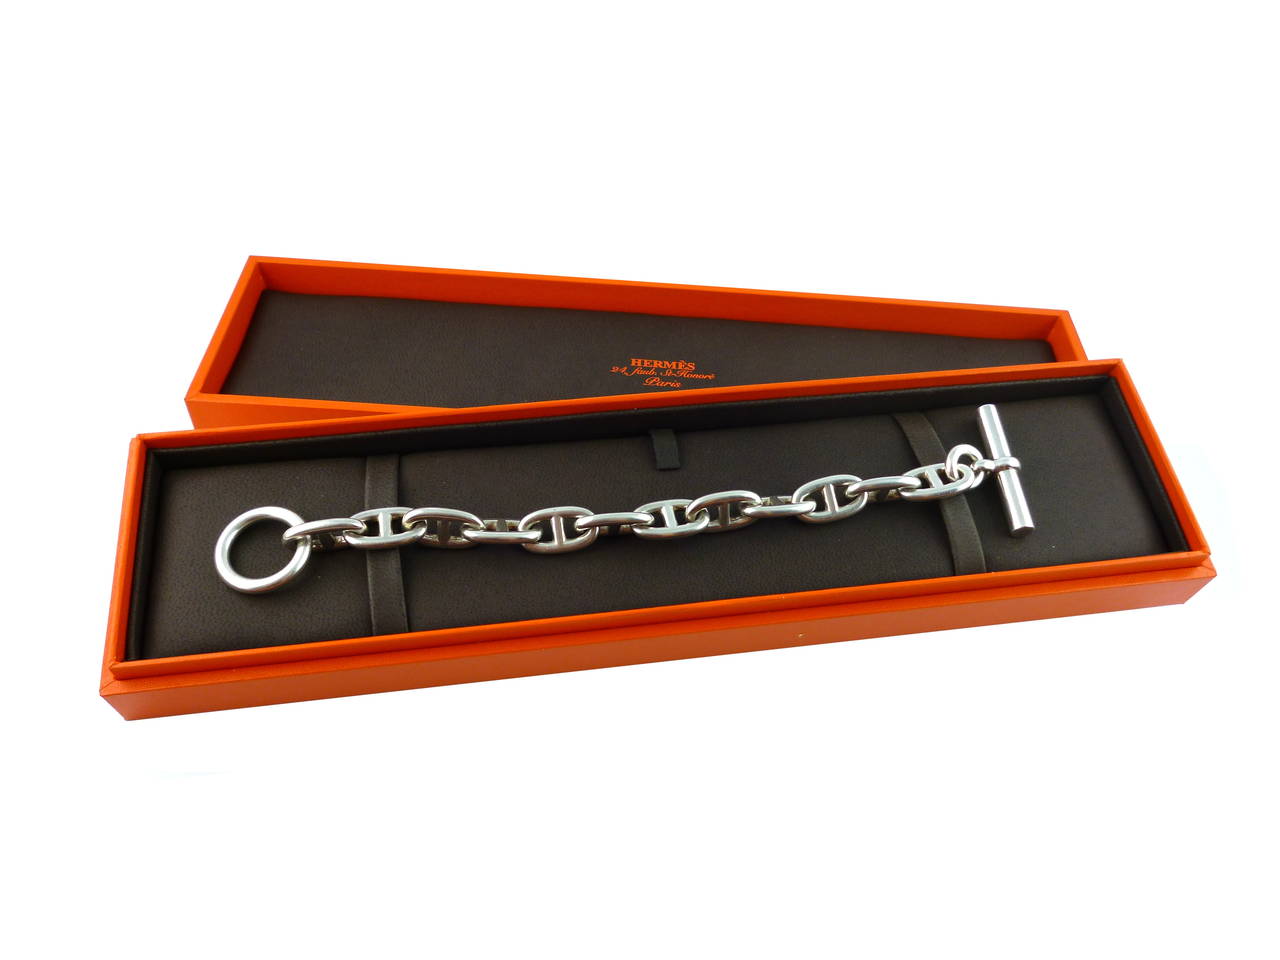 HERMES Paris iconic Chaine d'Ancre 925 solid silver link bracelet.

GM Size.
12 links.
Toggle clasp.

Marked "HERMES".
Fully hallmarked including maker's hallmark, Ag 925 and French silver hallmark "Minerve".

Indicative